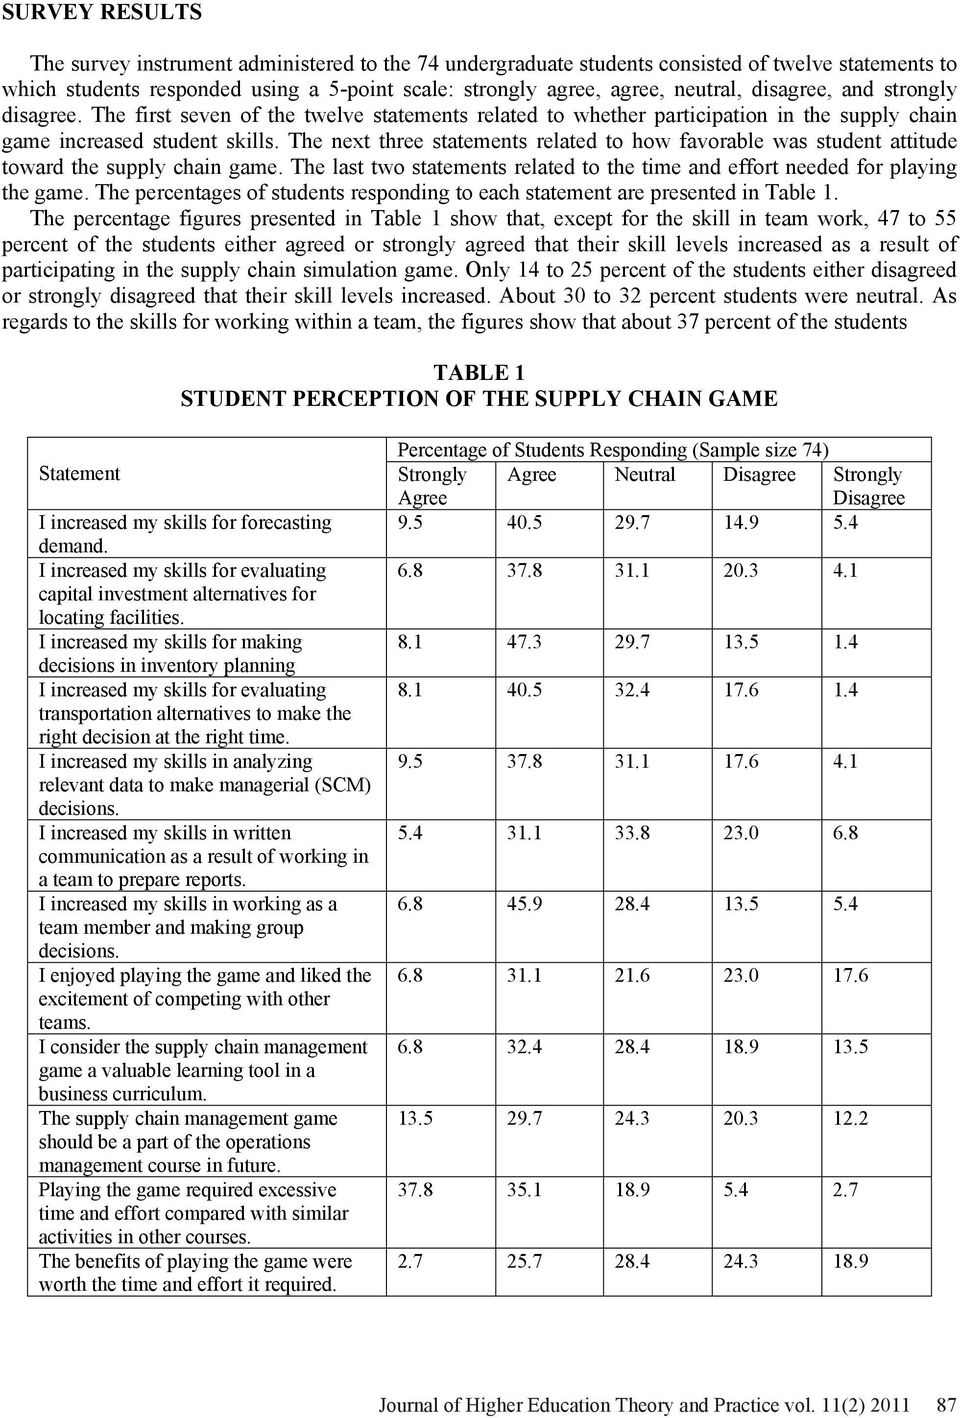 The next three statements related to how favorable was student attitude toward the supply chain game. The last two statements related to the time and effort needed for playing the game.